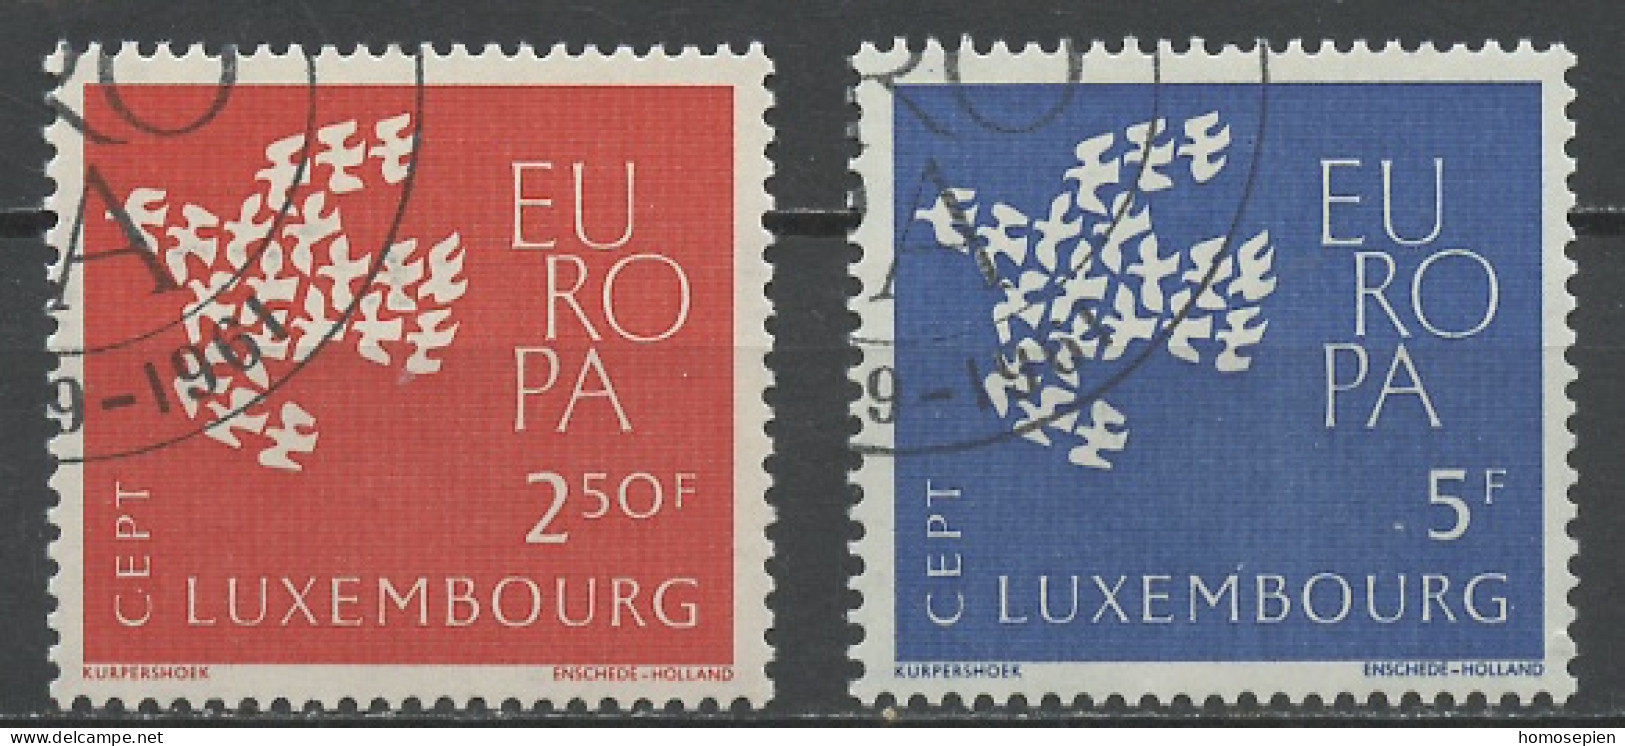 Luxembourg - Luxemburg 1961 Y&T N°601 à 602 - Michel N°647 à 648 (o) - EUROPA - Used Stamps